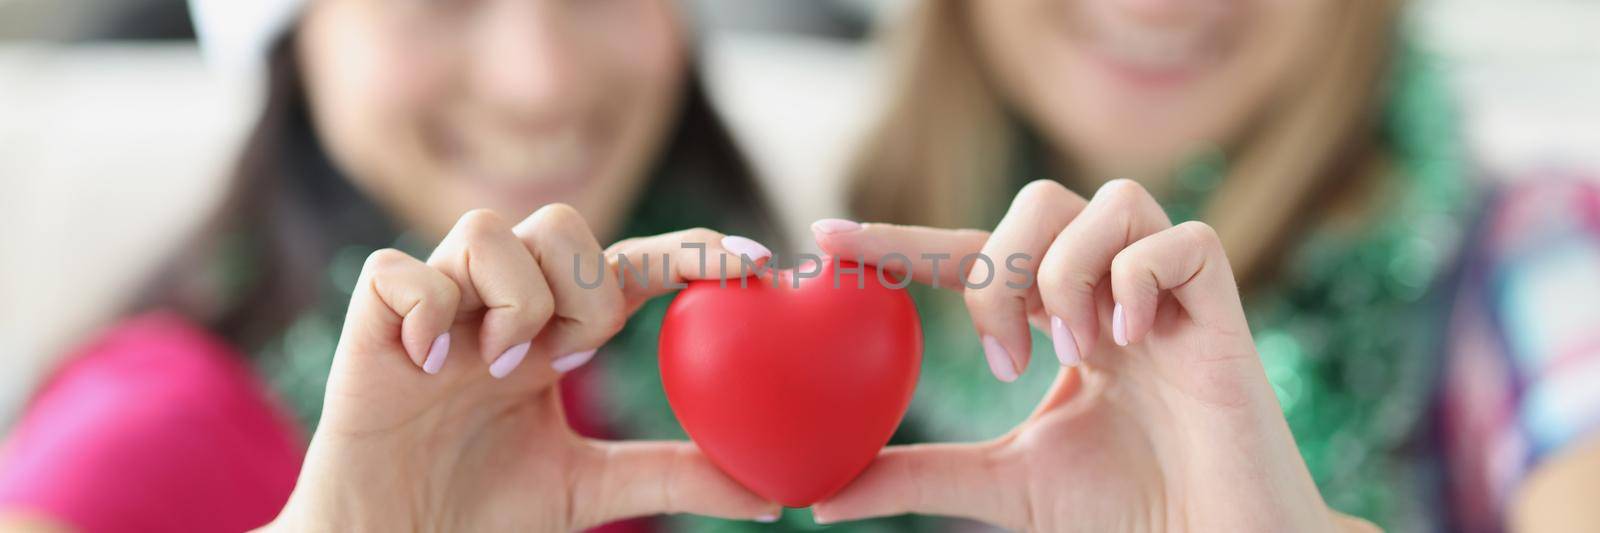 Sisters holding plastic red heart in hands and smiling by kuprevich